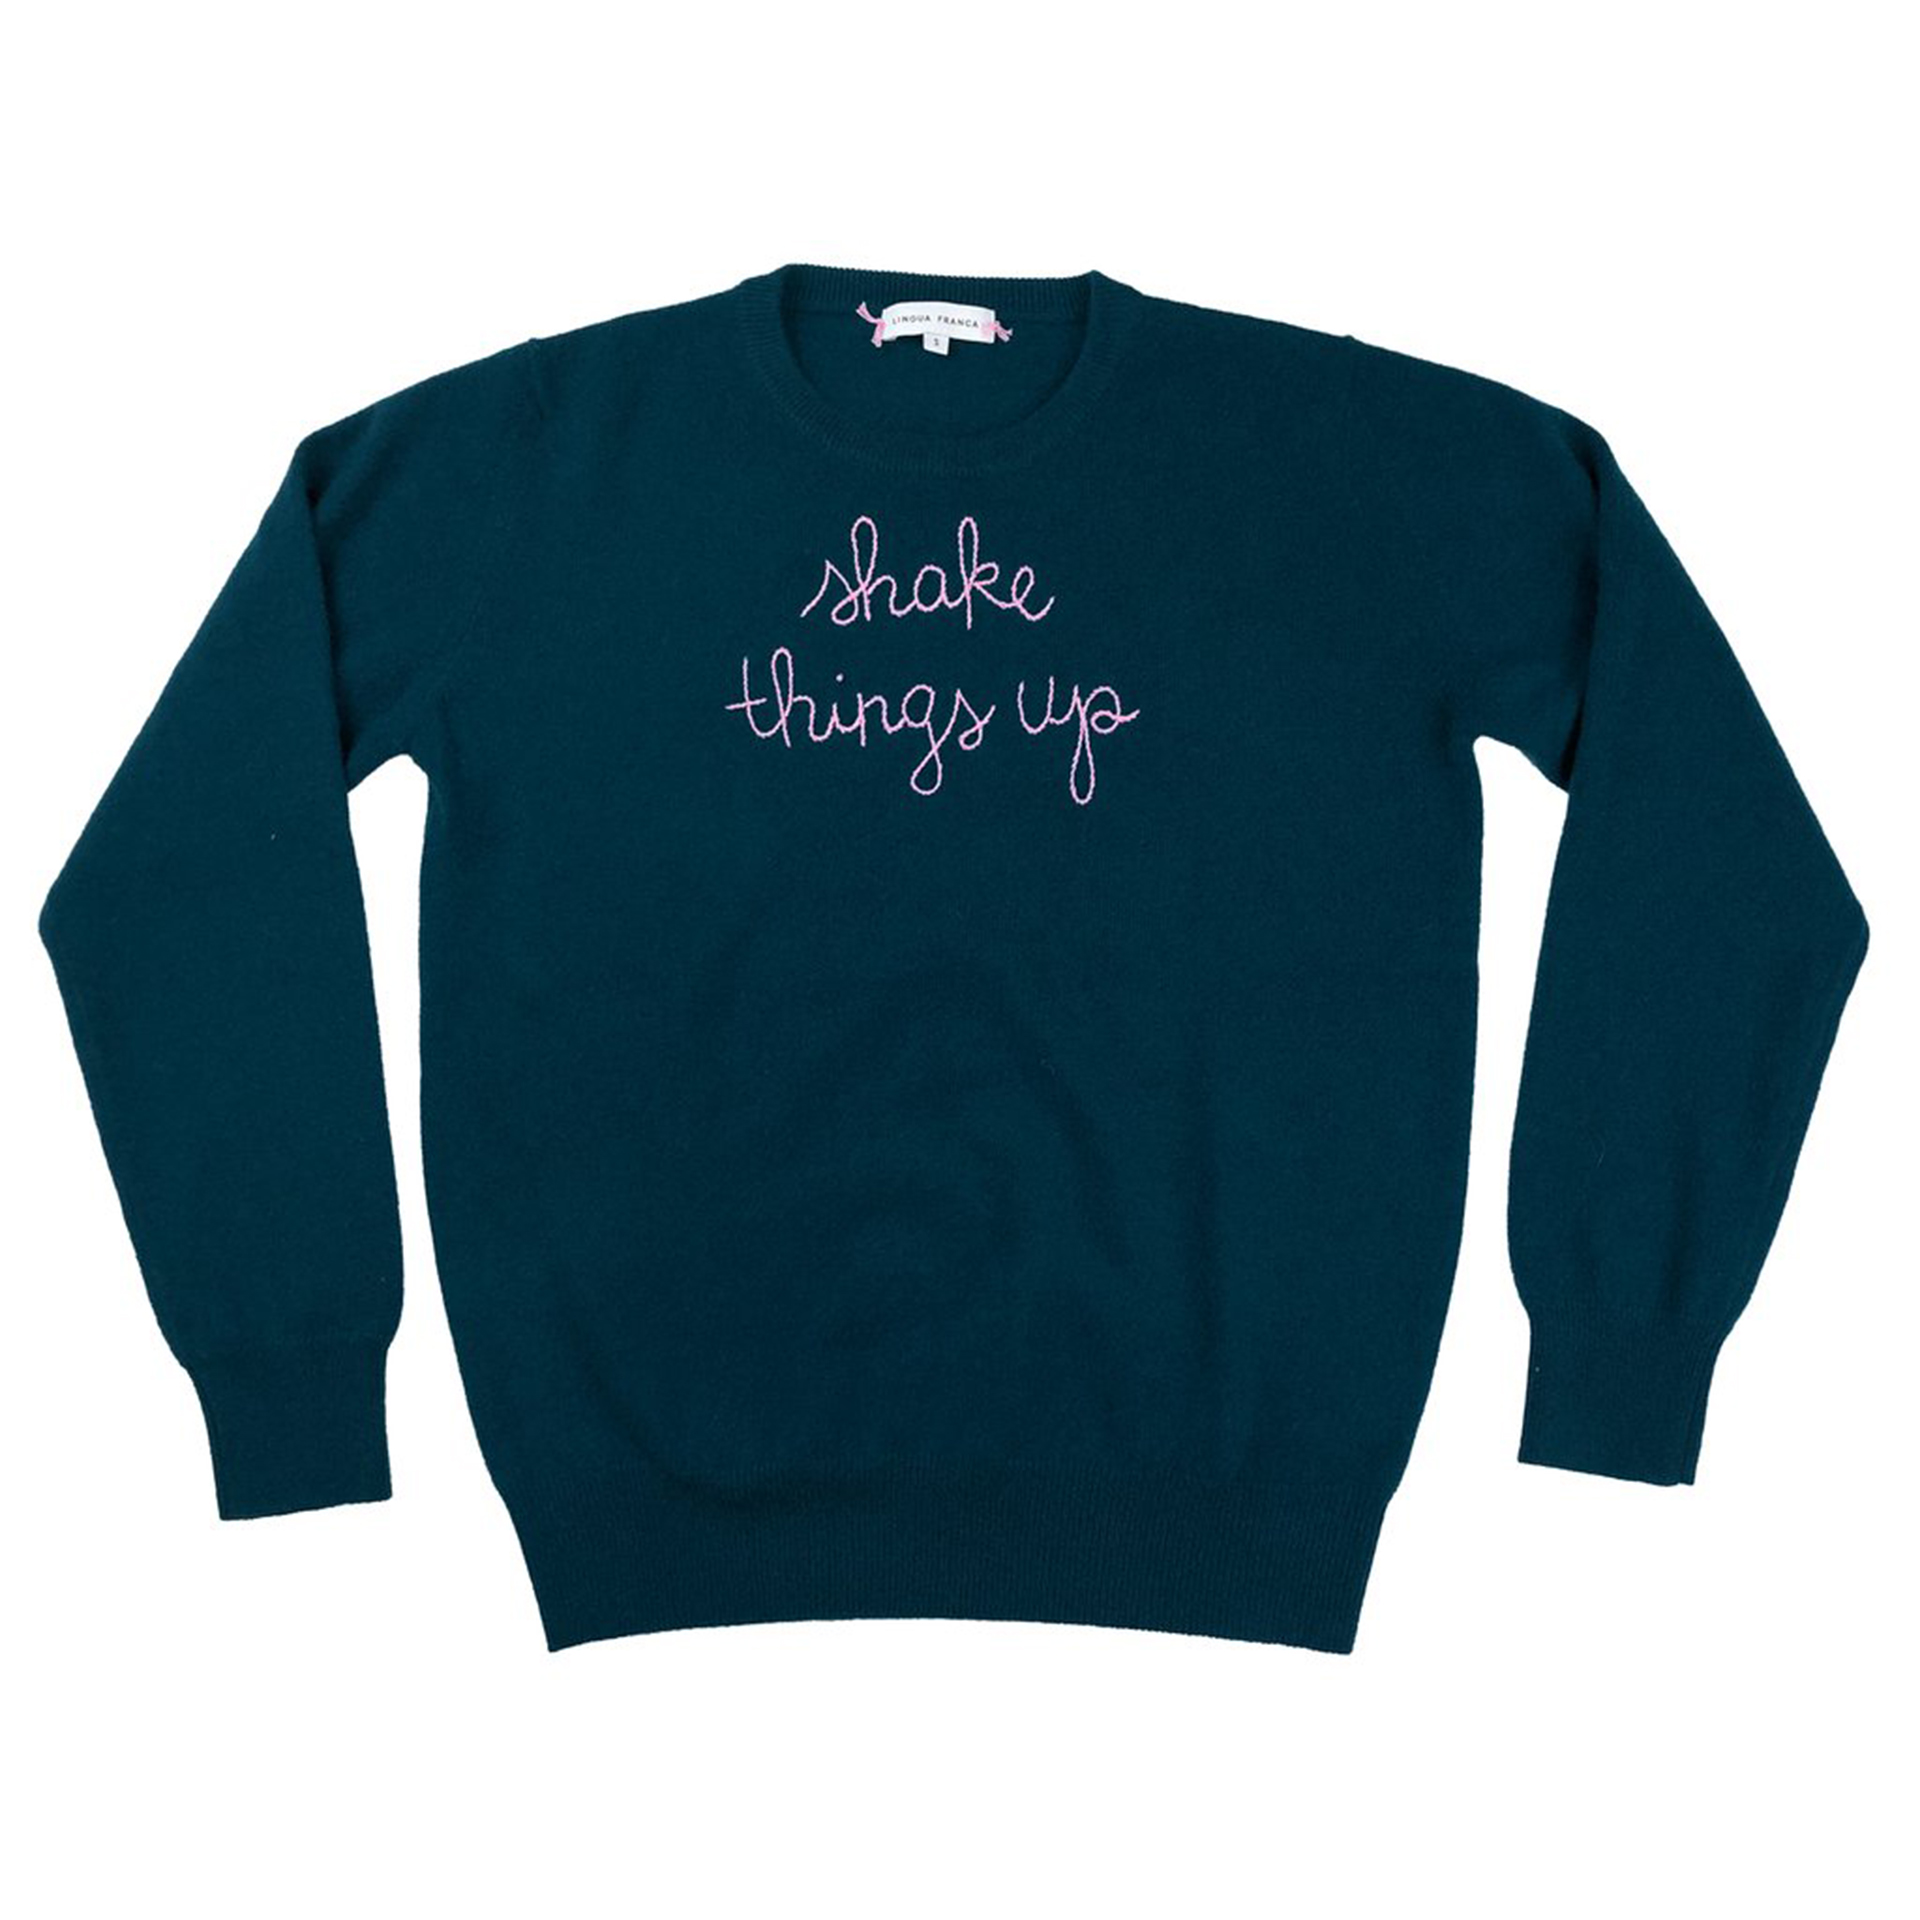 Lingua Franca Shake Things Up cashmere sweater, $380